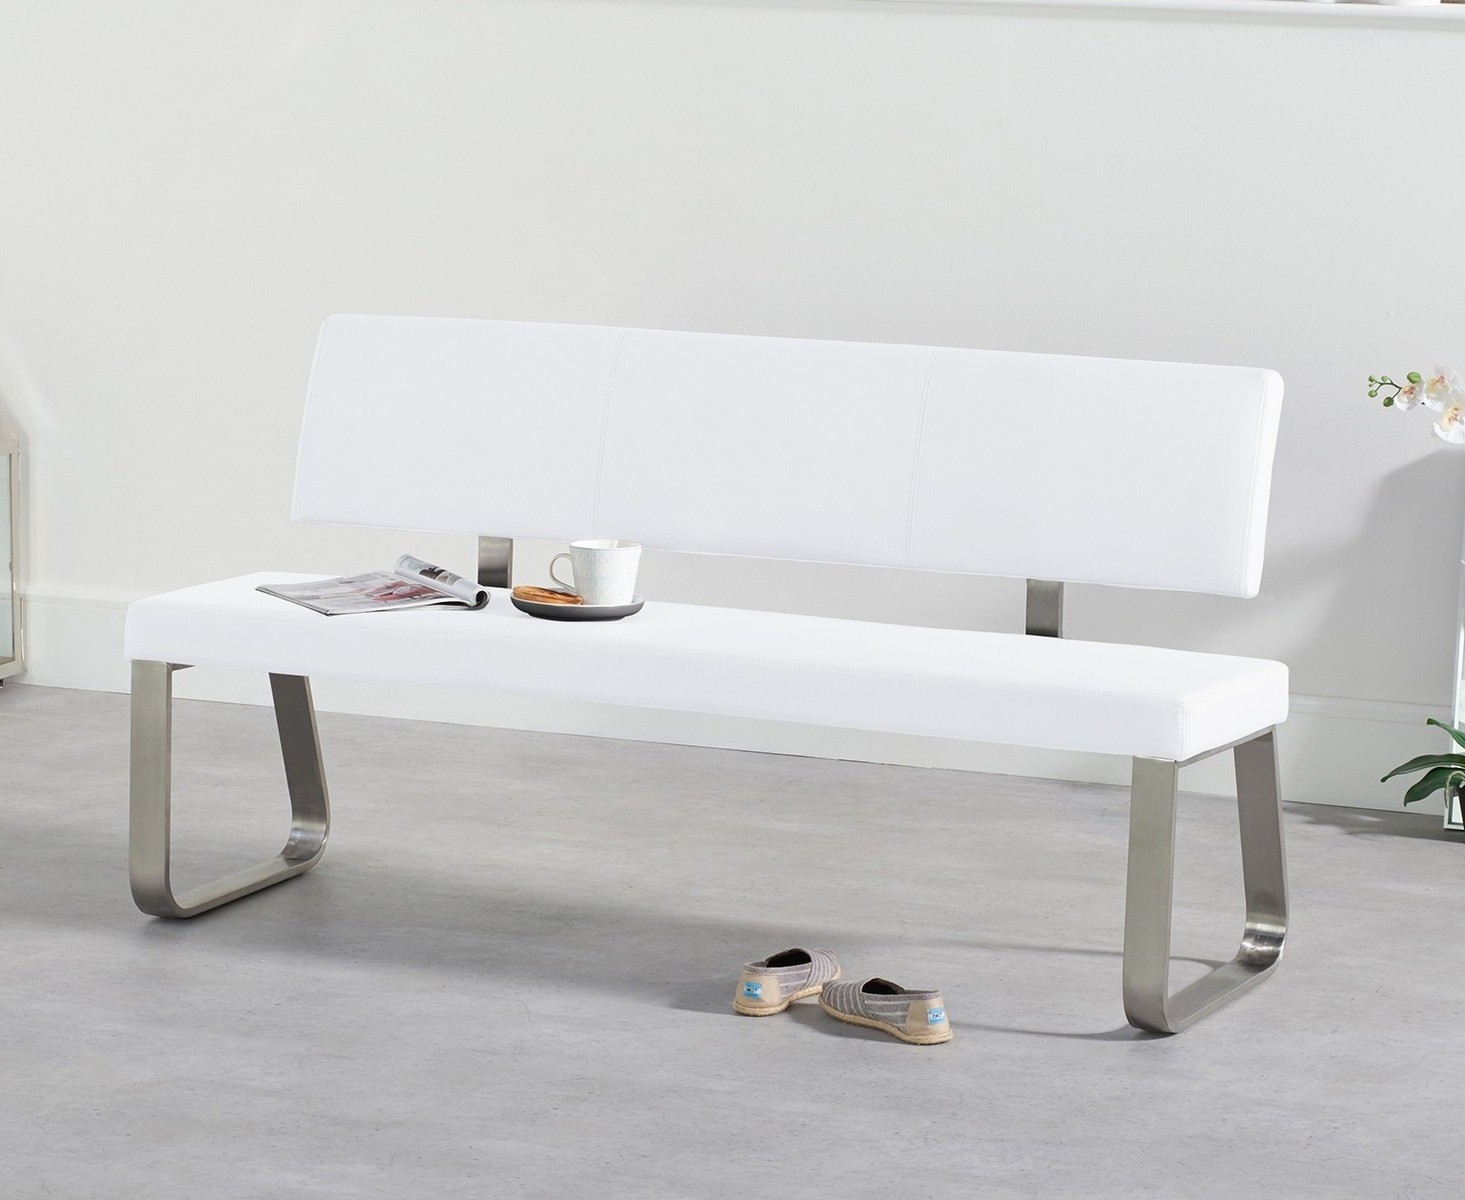 Malaga Large White Bench, Andalucia Modern White Leather Bench Large 60 Inch